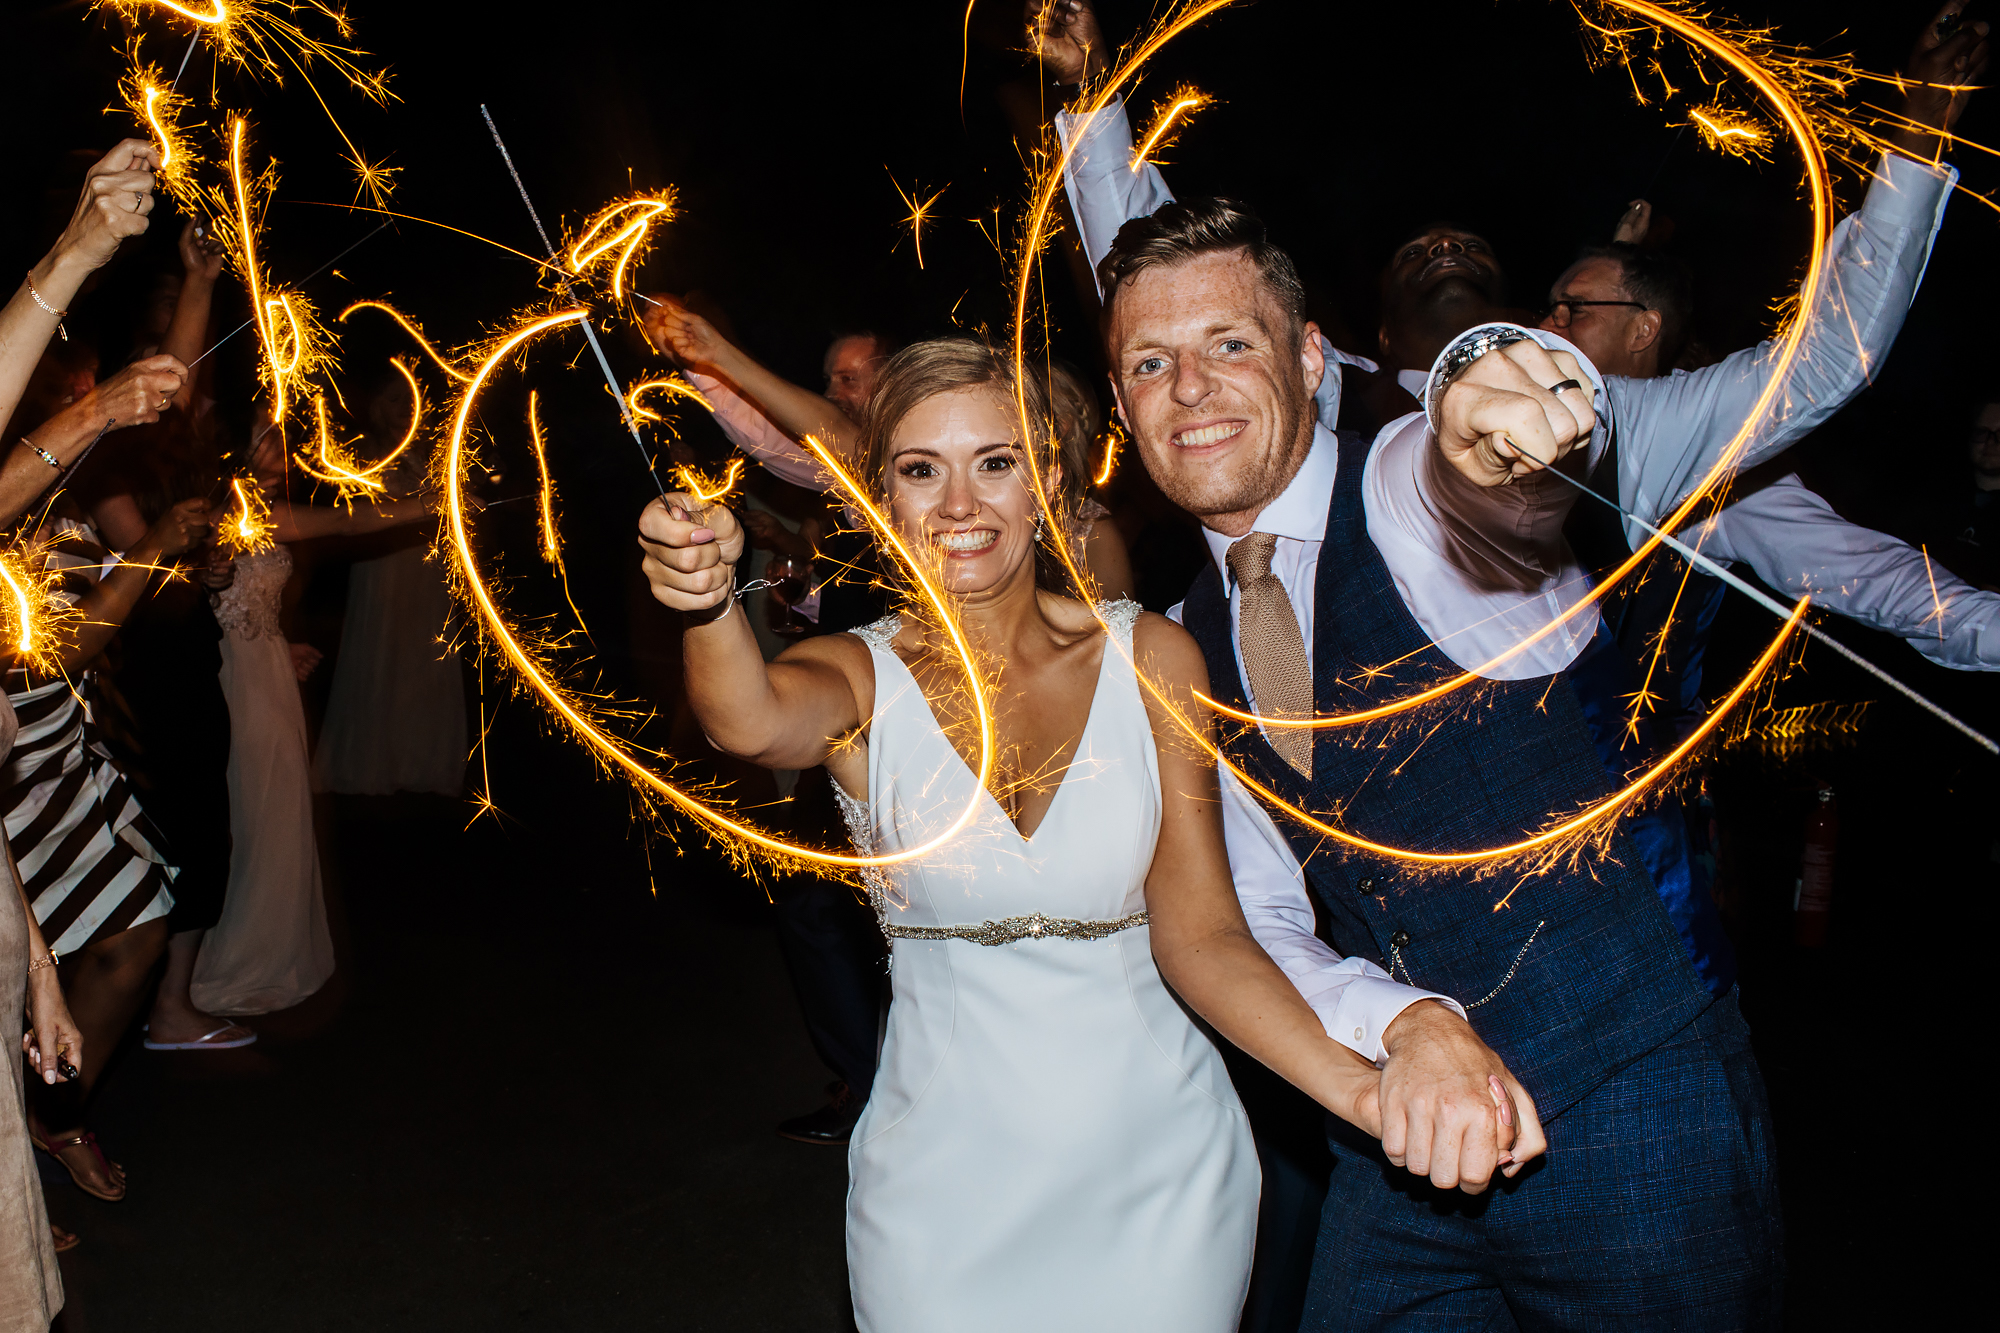 Bride and groom playing with sparklers at a wedding